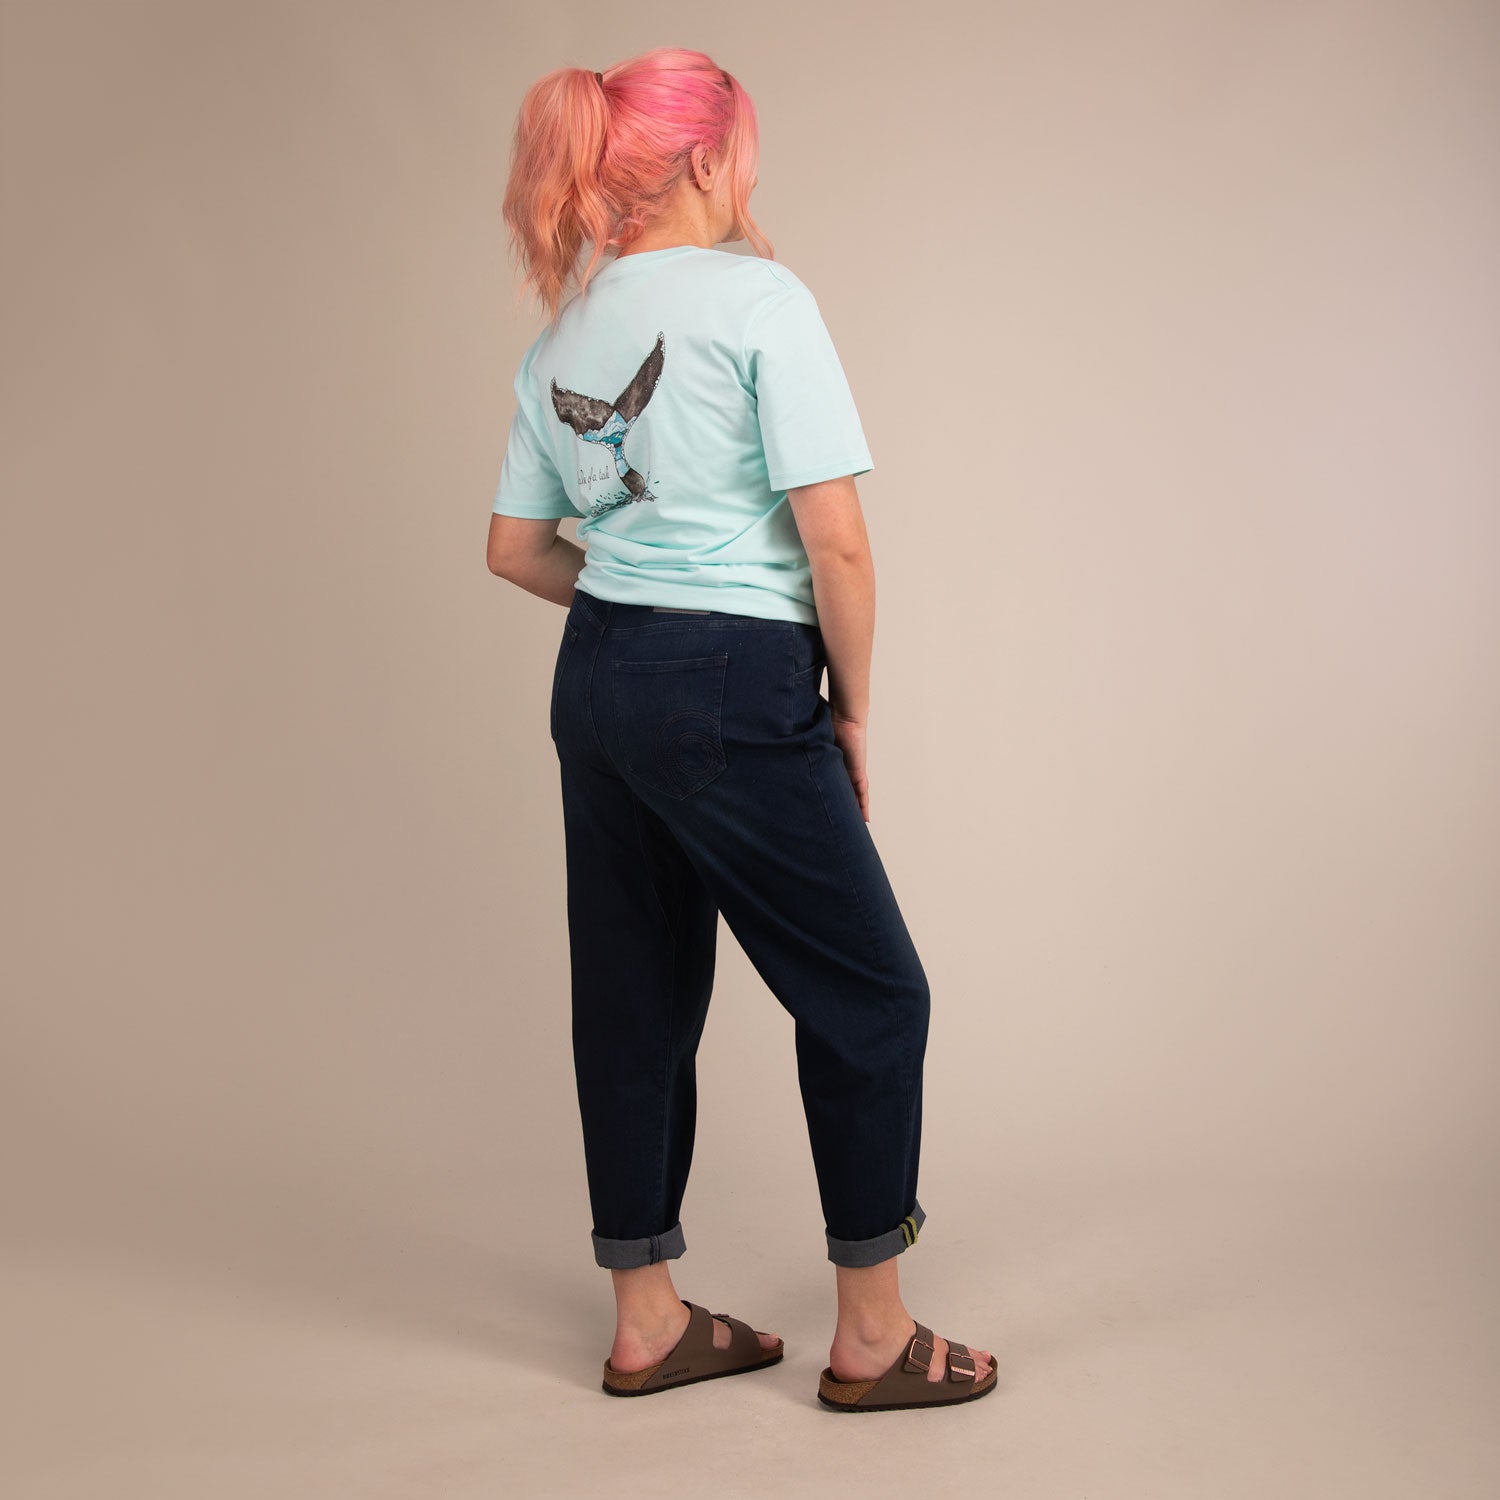 WHALE TEE | Organic Cotton T-Shirt | 3RD ROCK Clothing -  Sophie is 5ft 9 with a 40.5" bust and wears a size L F